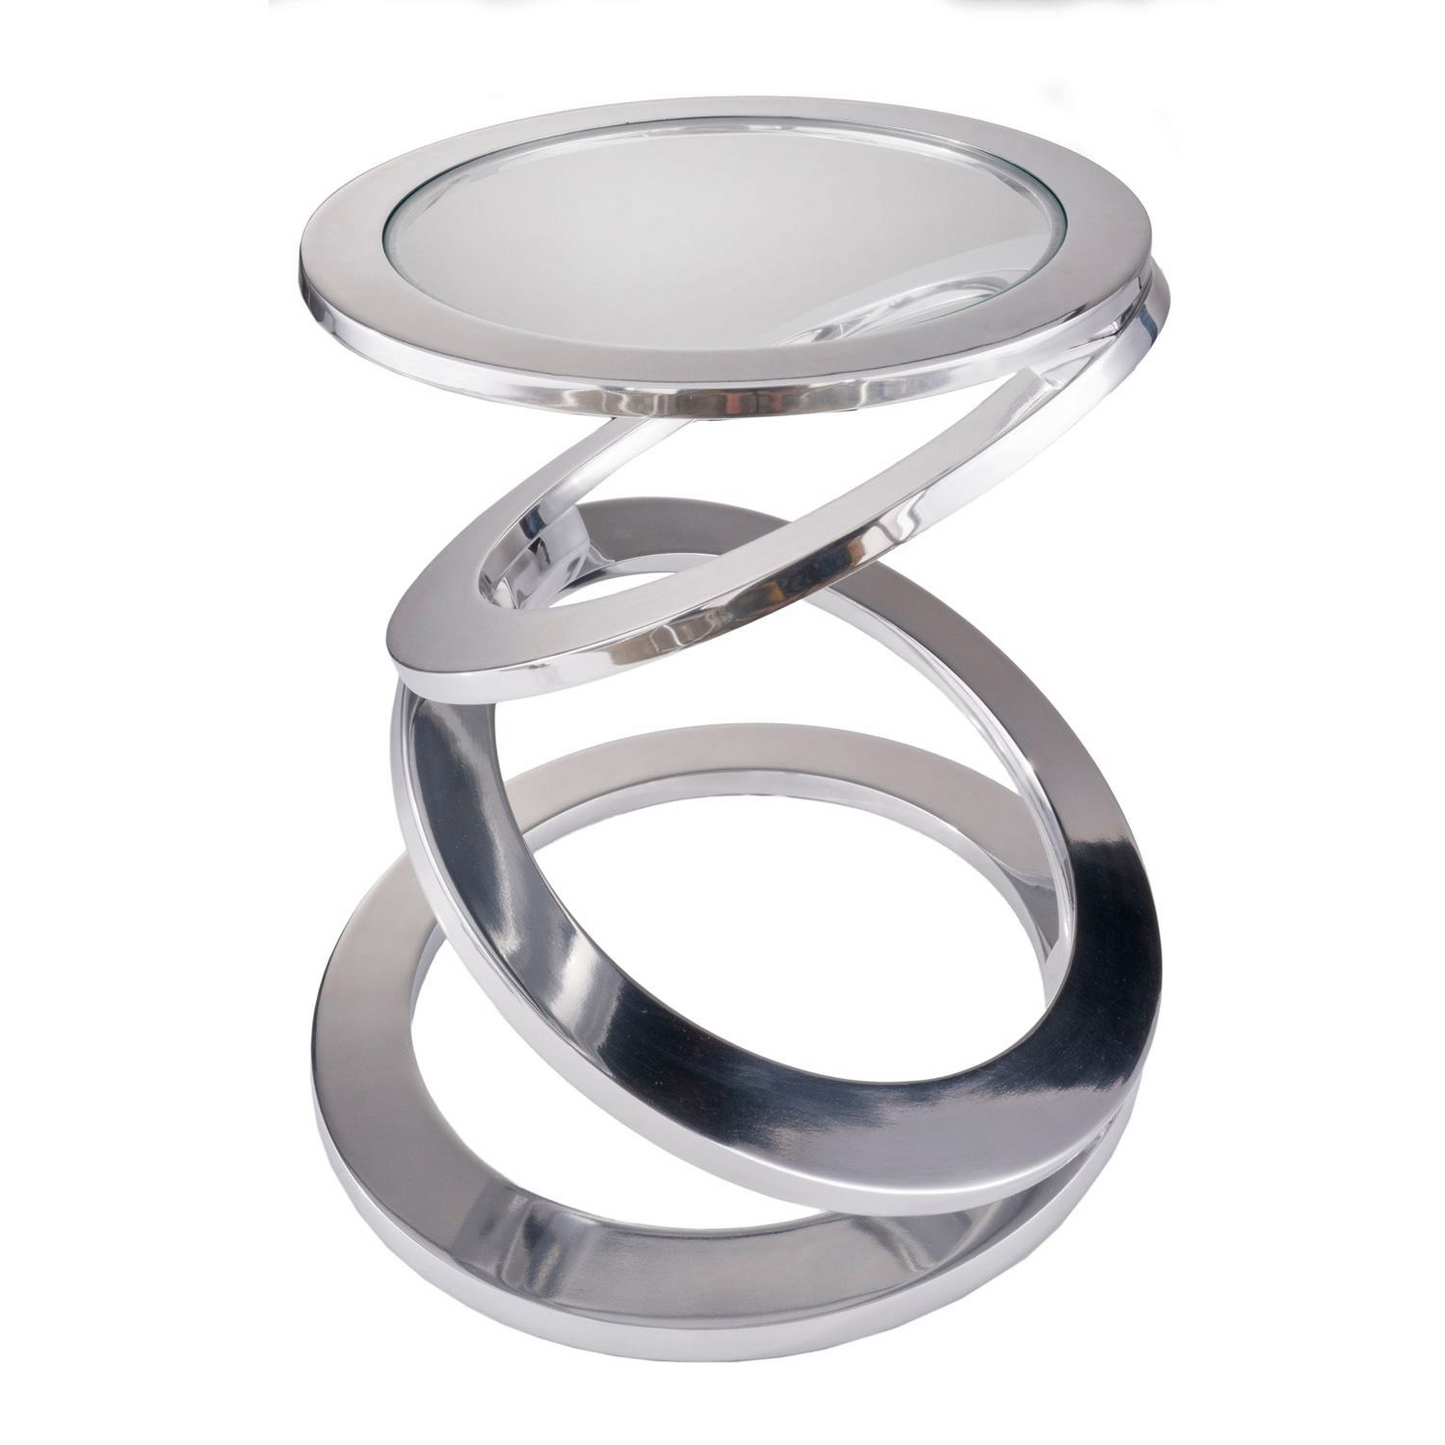 Silver Rings Metal Frame and Glass Top Accent Table